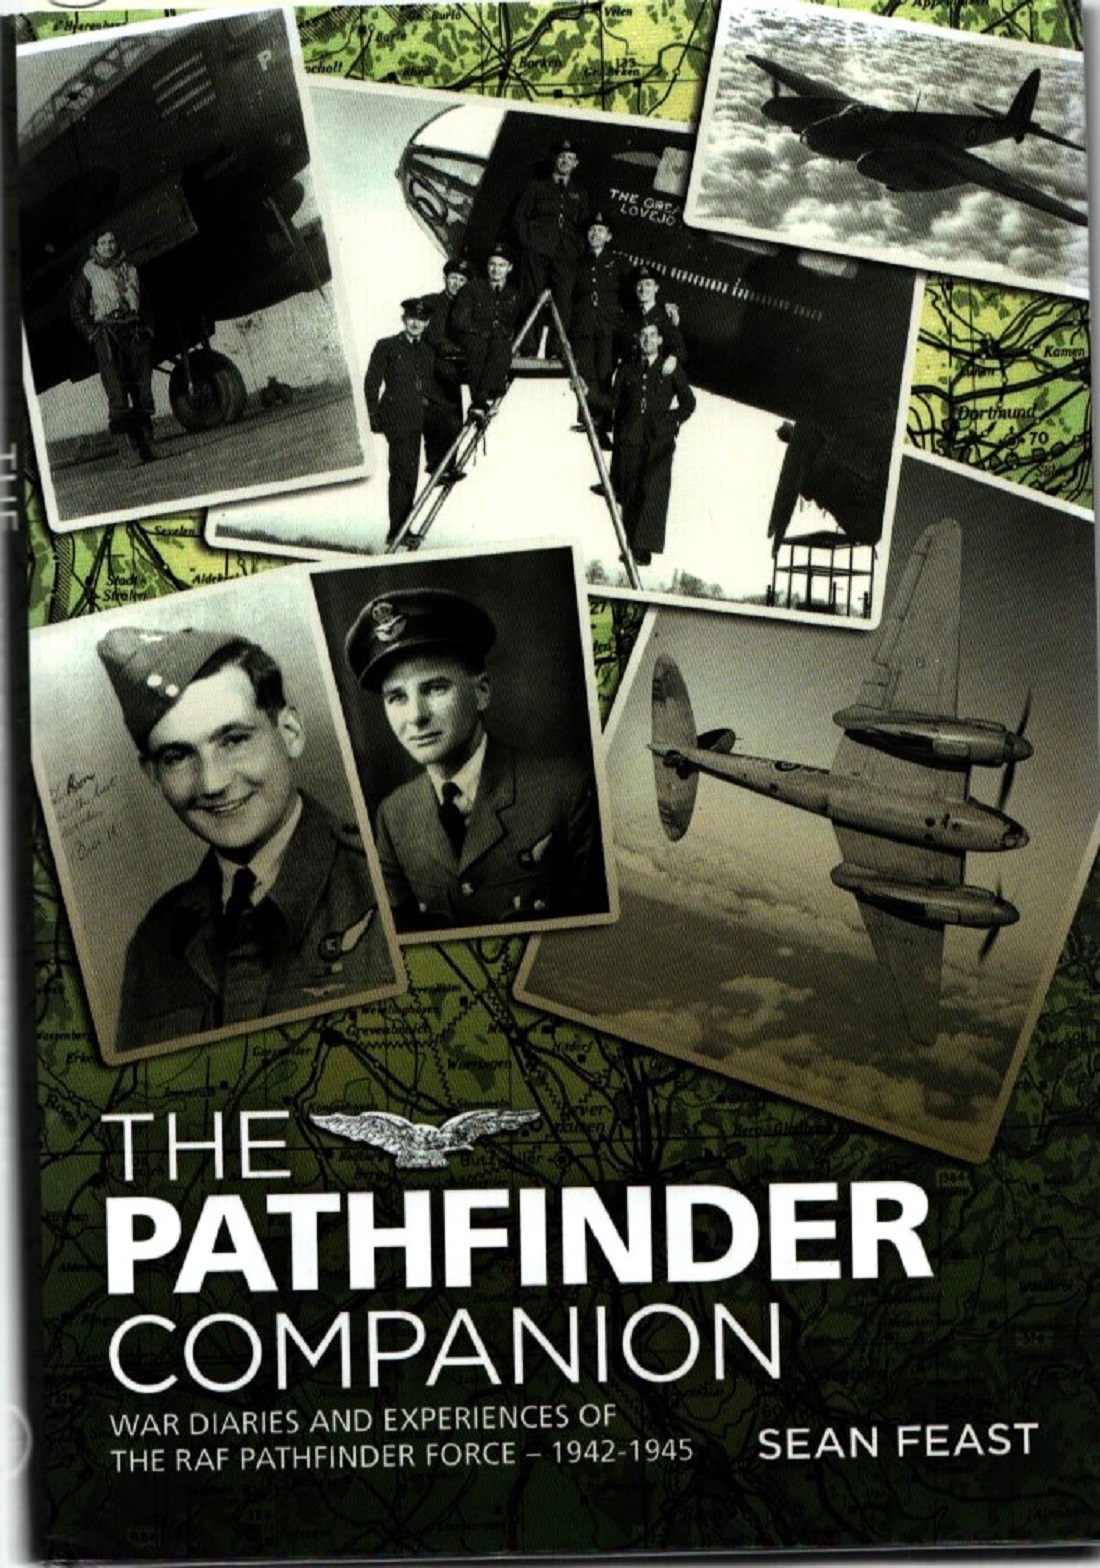 The Pathfinder Companion: War Diaries and Experiences of the RAF Pathfinder Force-1942-1945 by - Bild 6 aus 9